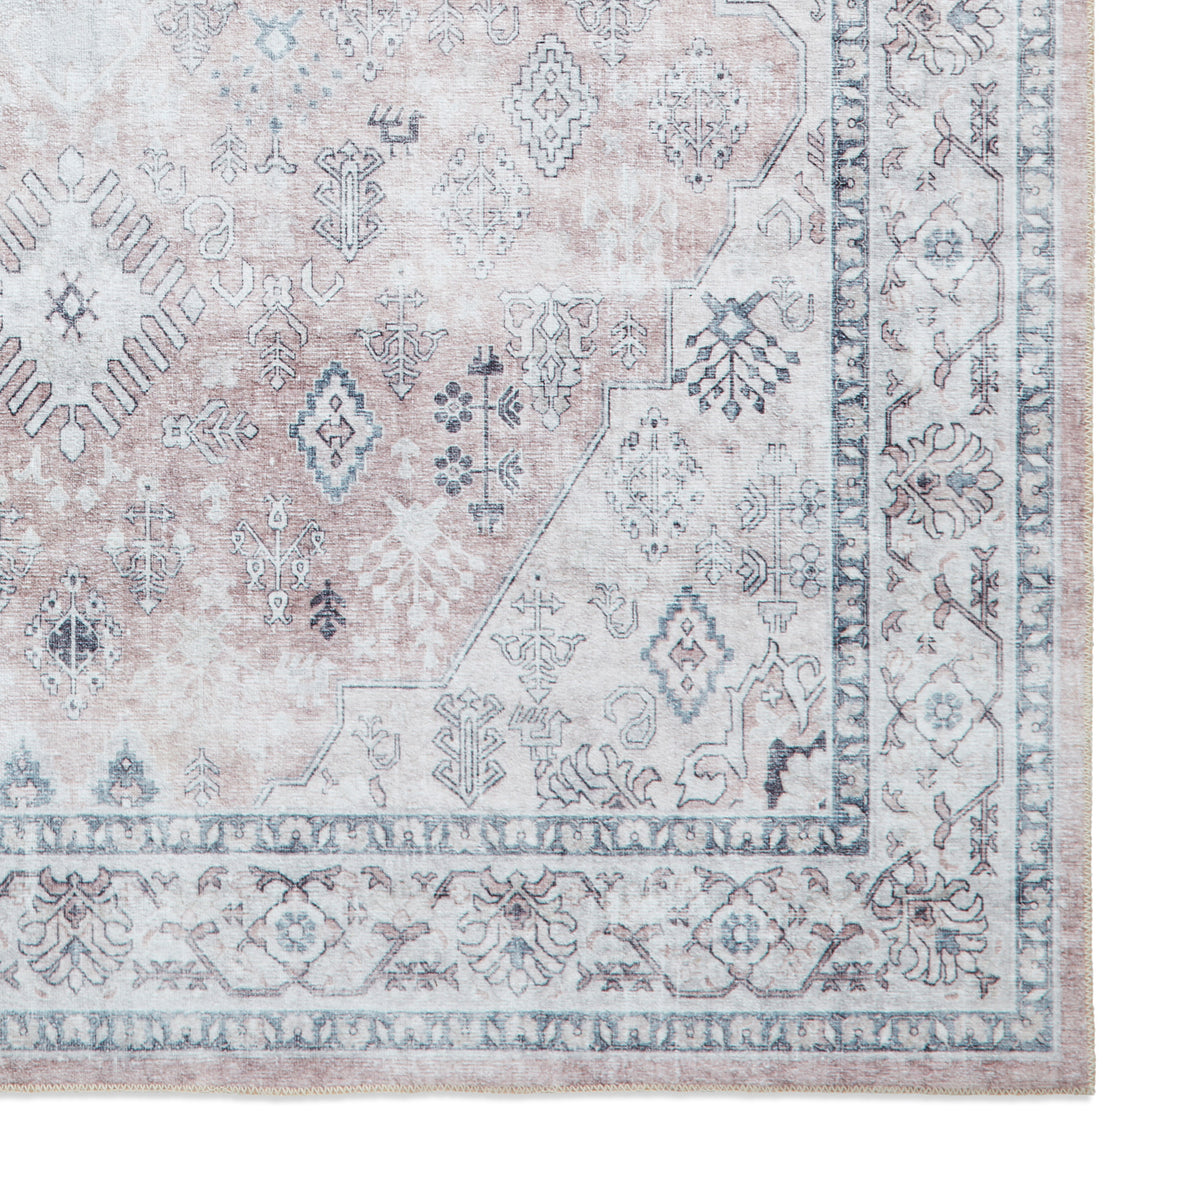 Lincoln Distressed Medallion Rug